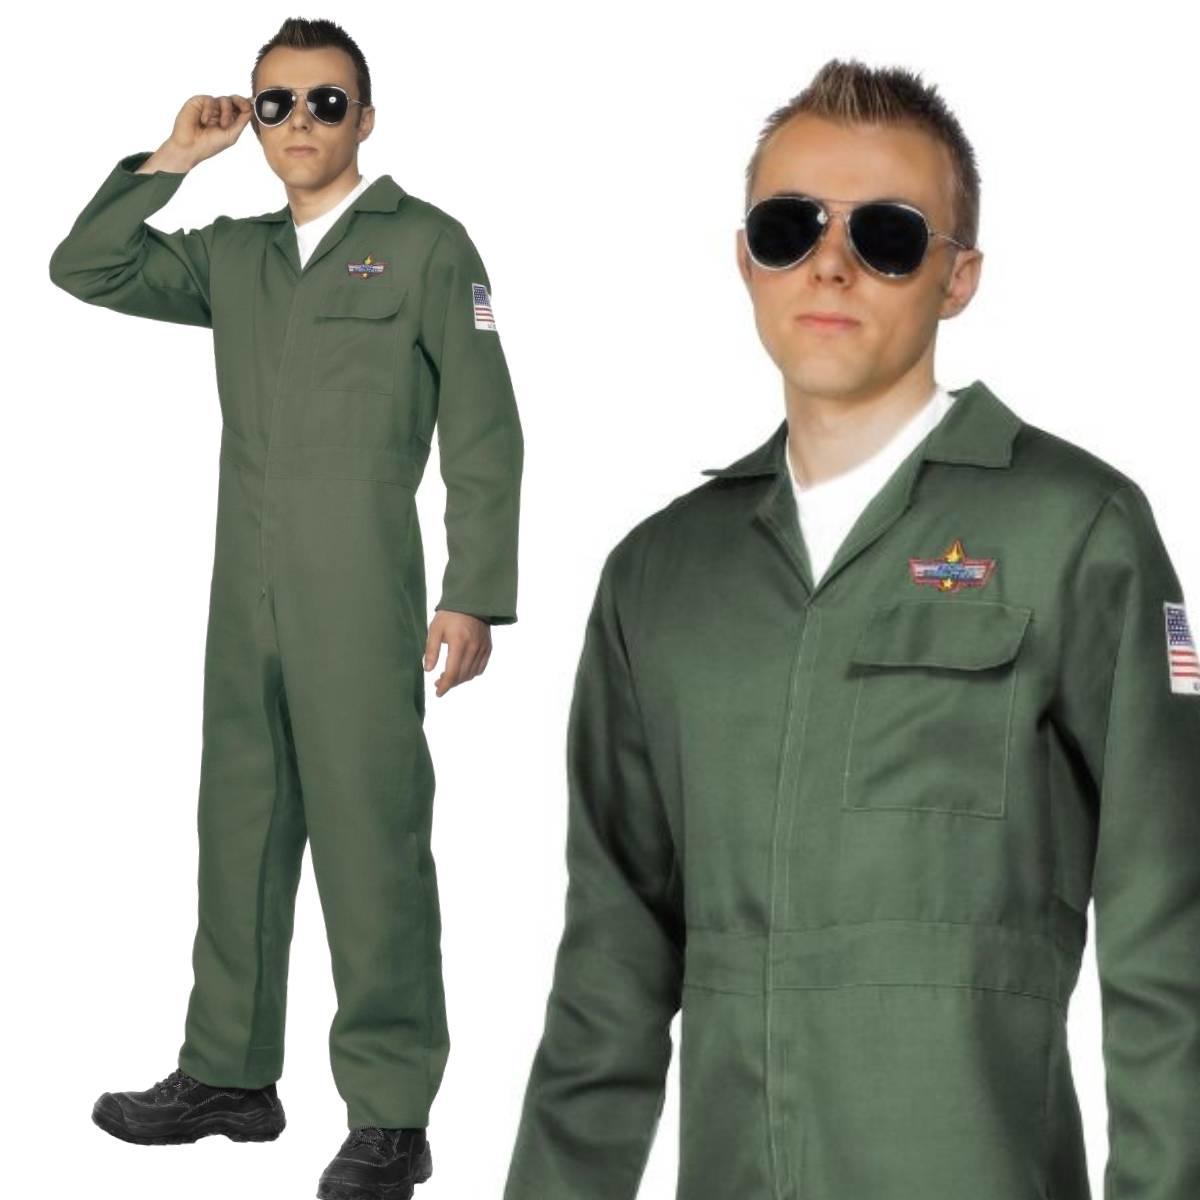 Top Gun US Aviator Costume in sizes med-xl by Smiffy 28623 available at Karnival Costumes online party shop